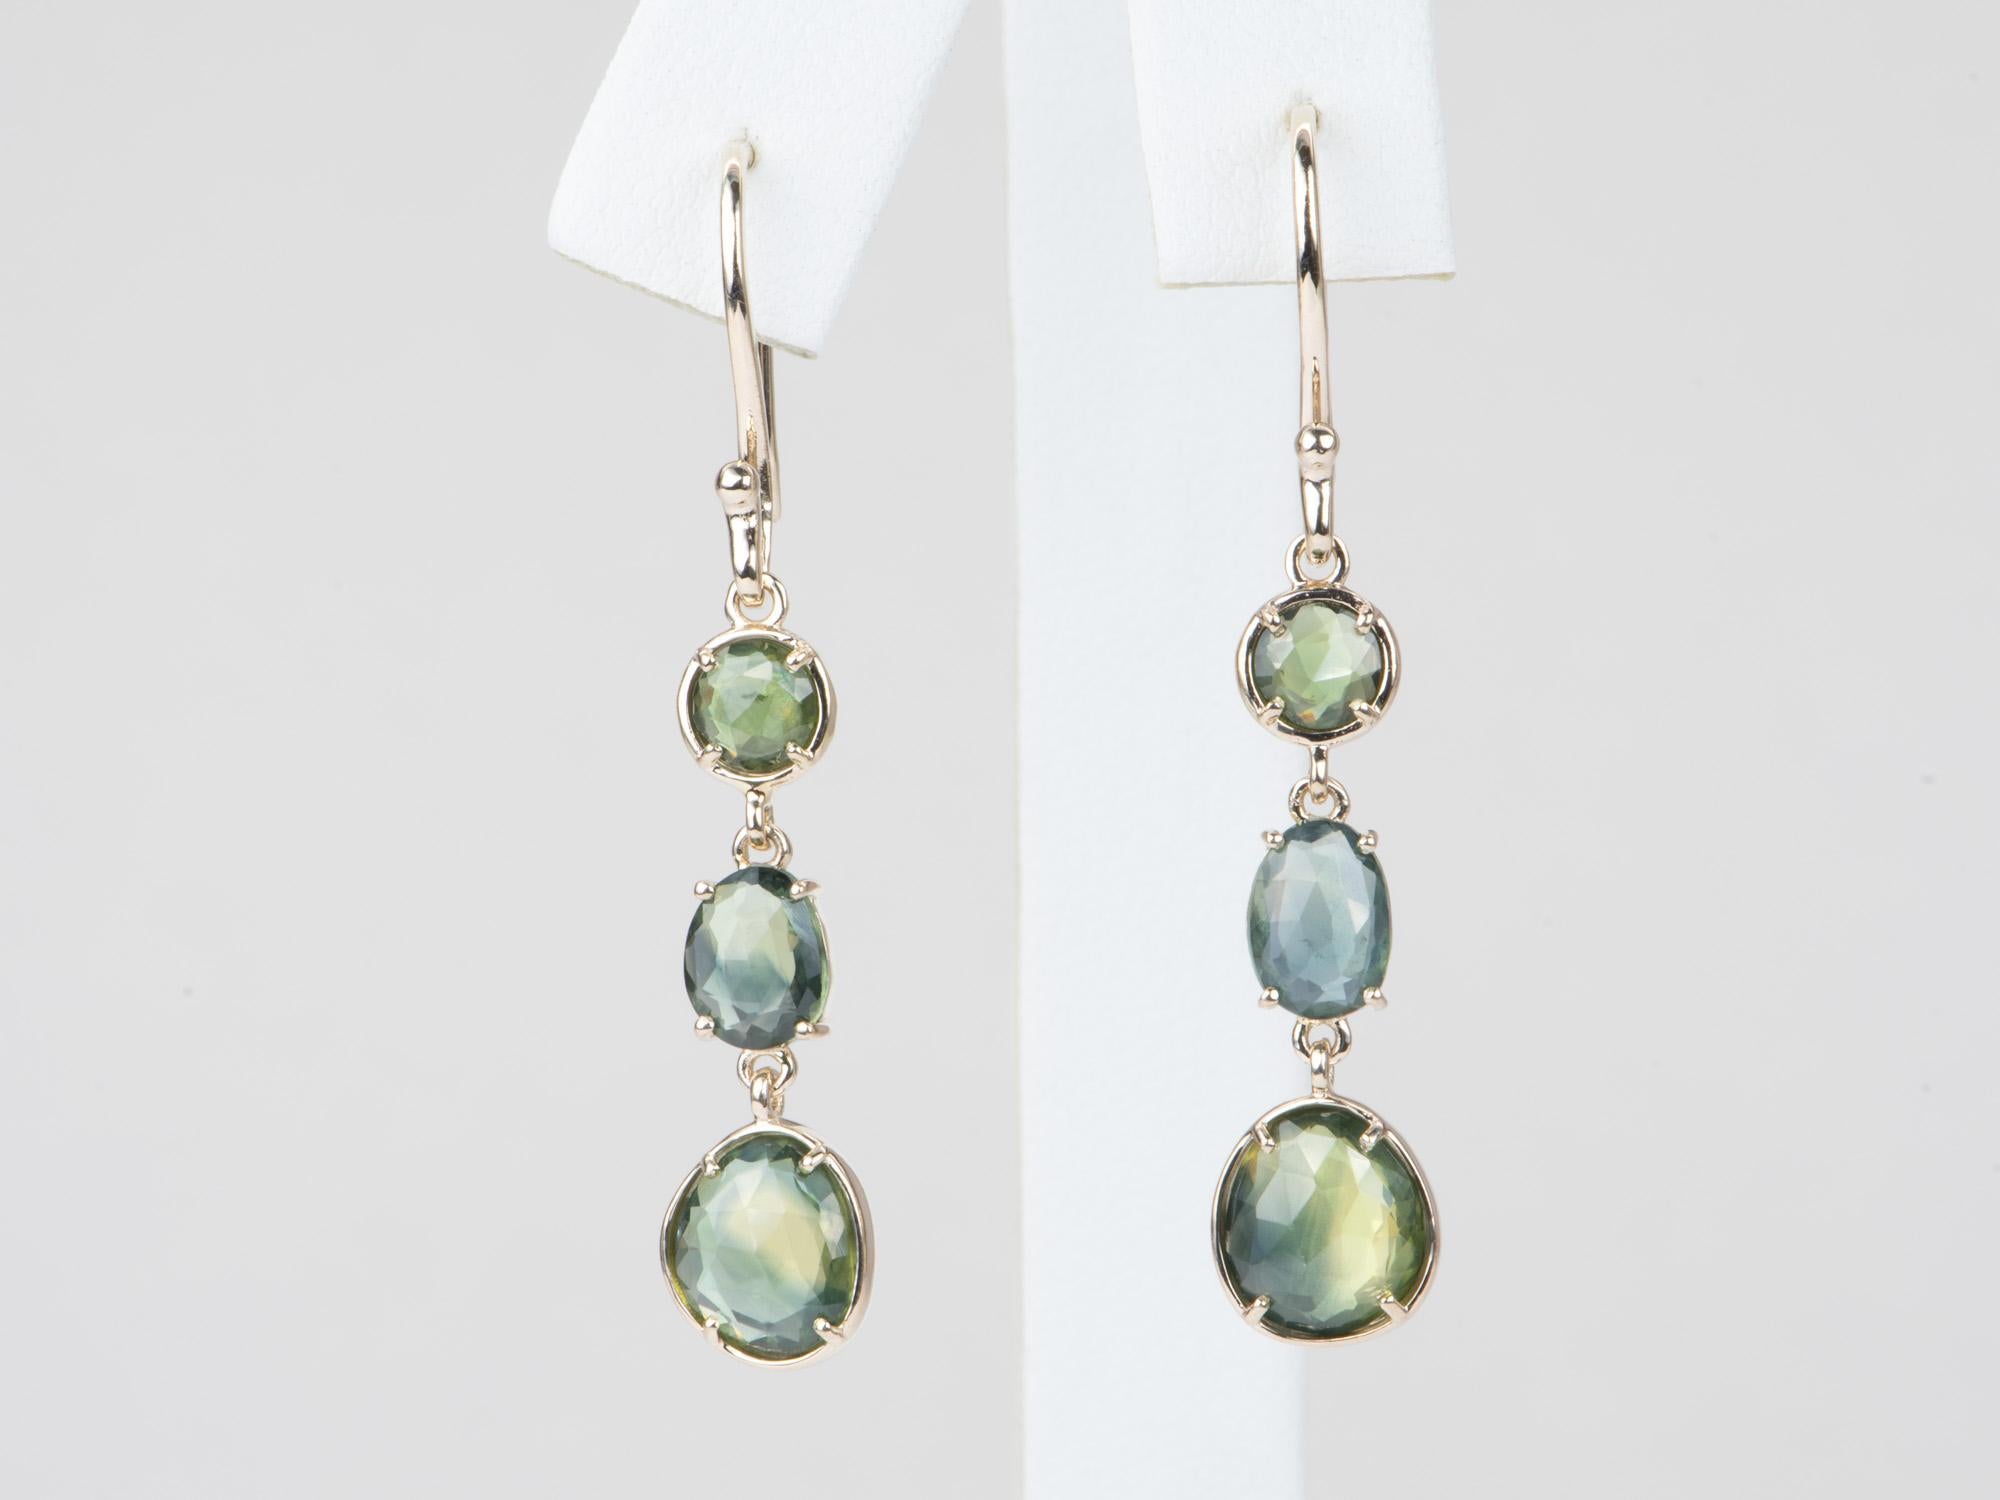 ♥ Solid 9k gold earrings set with beautiful freeform-shaped Madagascar sapphires
♥ Gorgeous blue green color!
♥ The item measures 43mm in length including the ear wire, 8.3mm in width, and stands 2.4mm tall

♥ Gemstone: Sapphire, 4.74ct total
♥ All